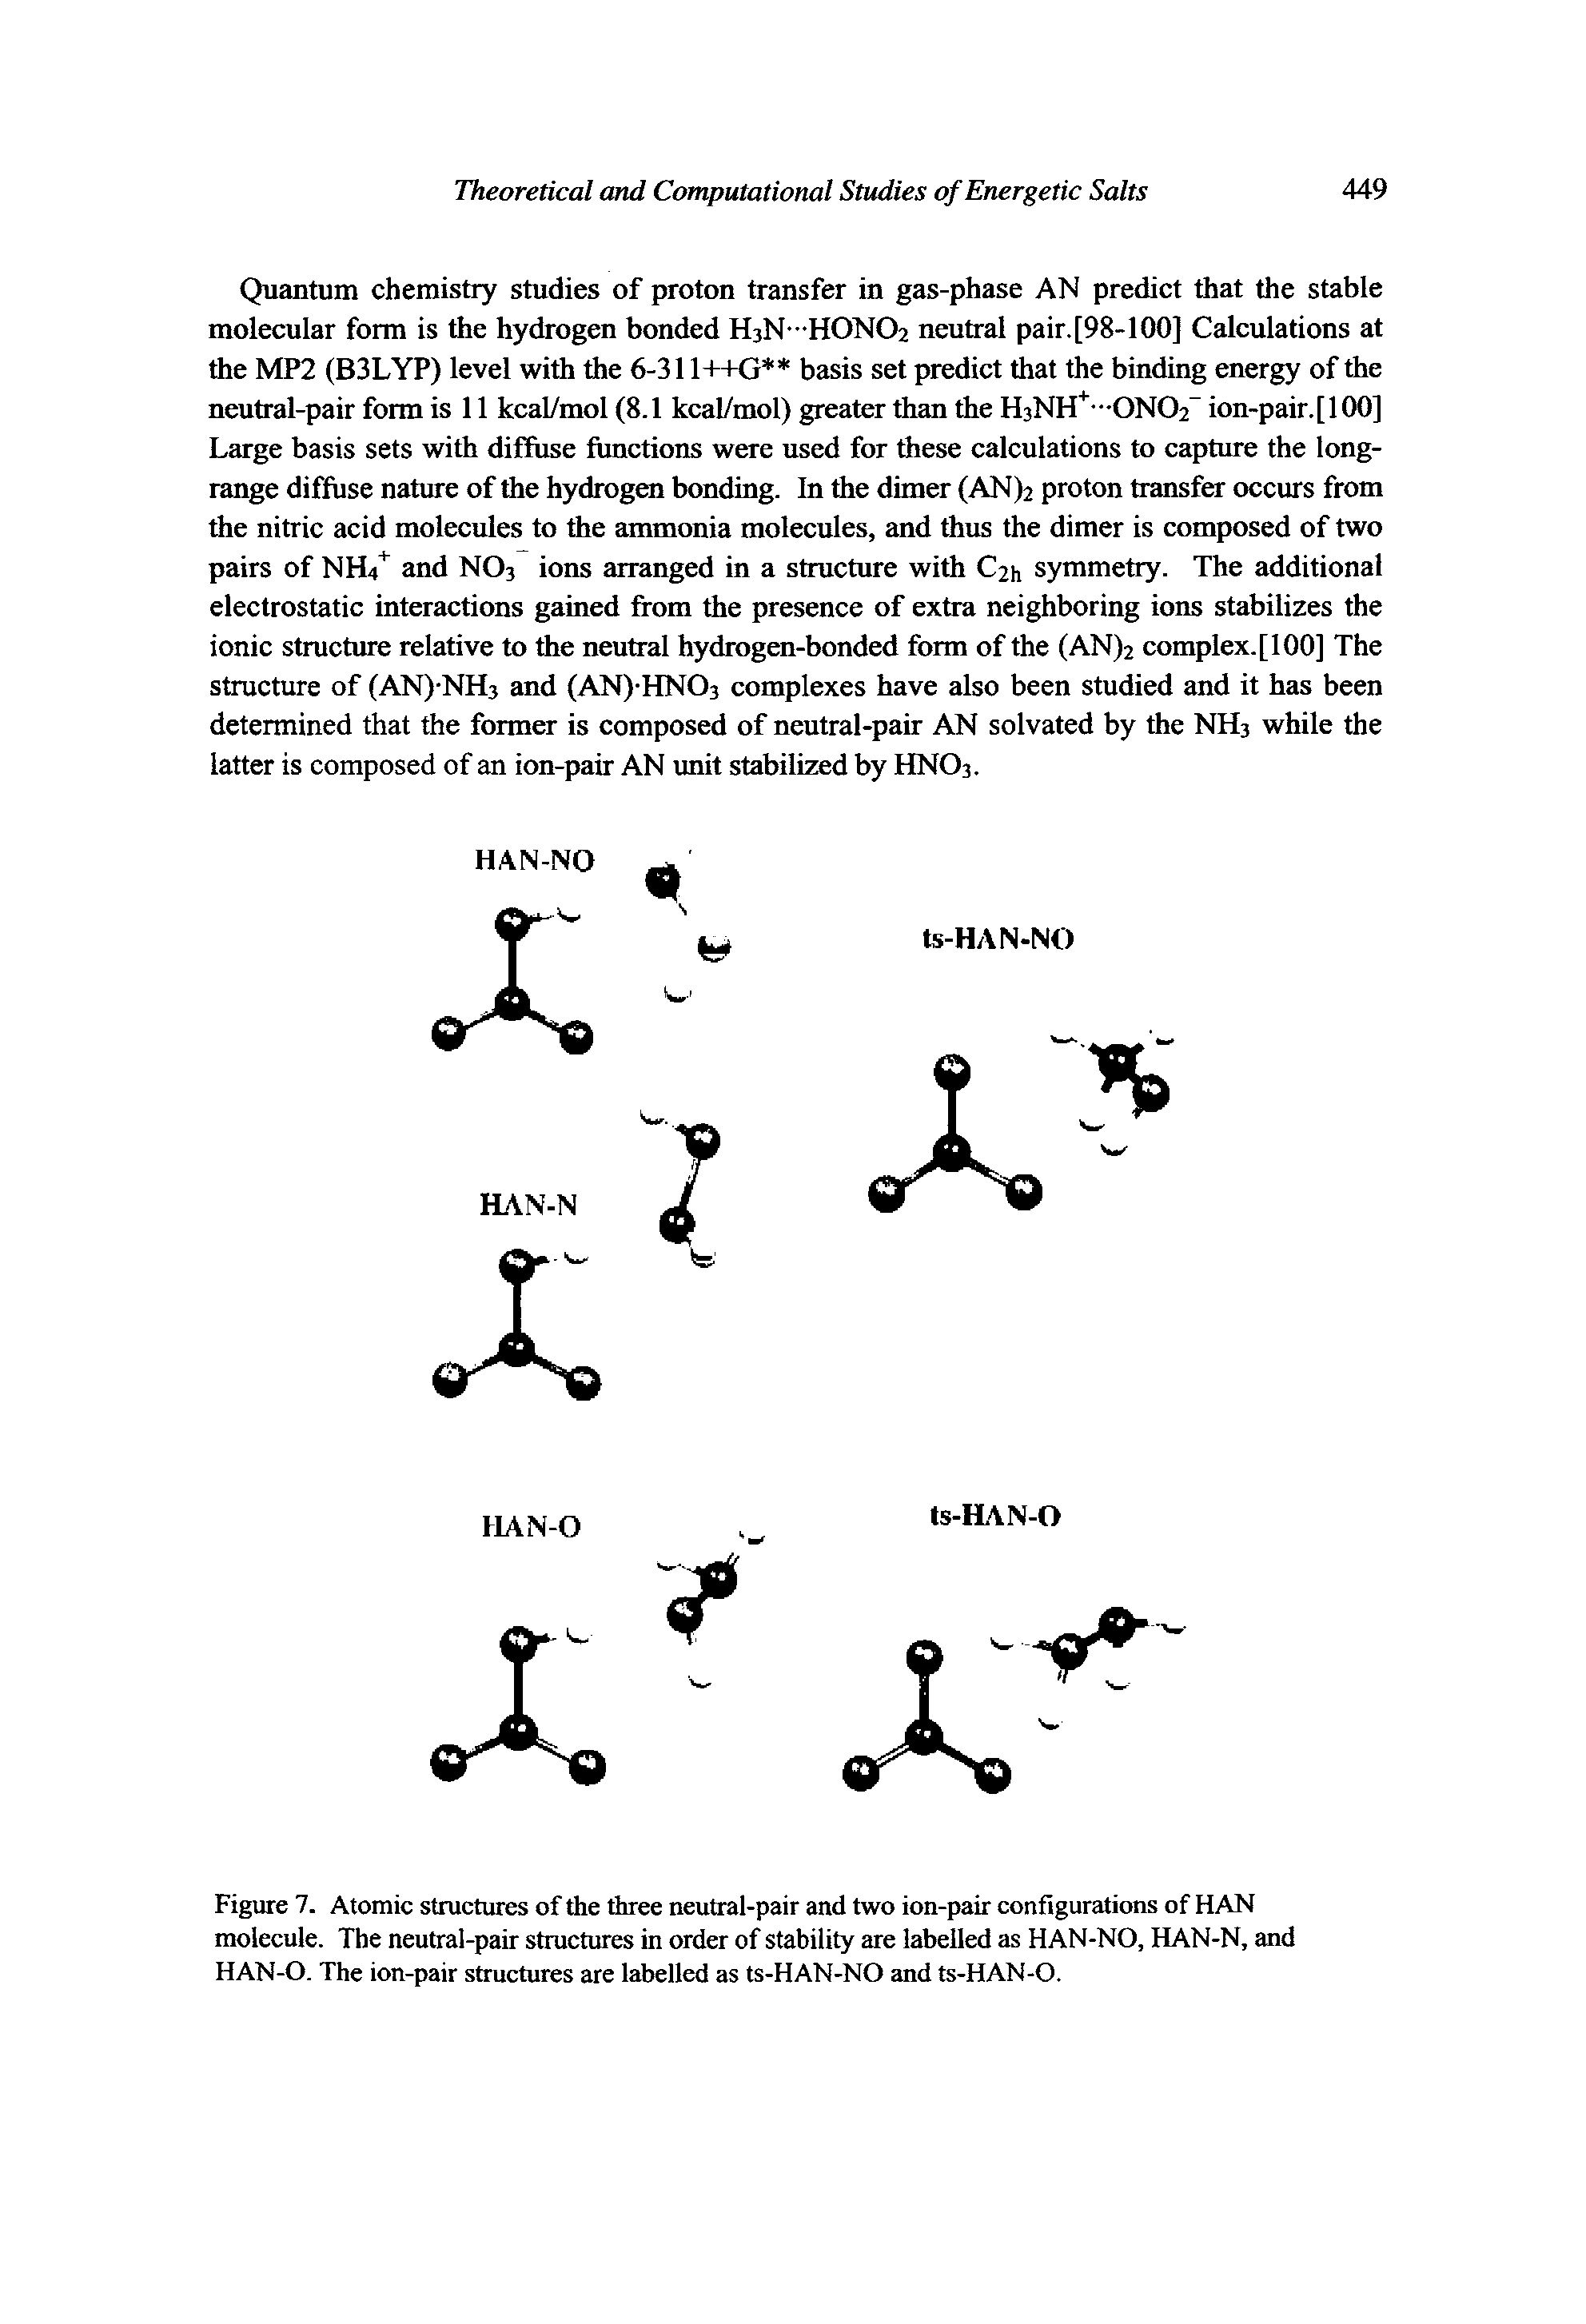 Figure 7. Atomic structures of the three neutral-pair and two ion-pair configurations of HAN molecule. The neutral-pair structures in order of stability are labelled as HAN-NO, HAN-N, and HAN-O. The ion-pair structures are labelled as ts-HAN-NO and ts-HAN-O.